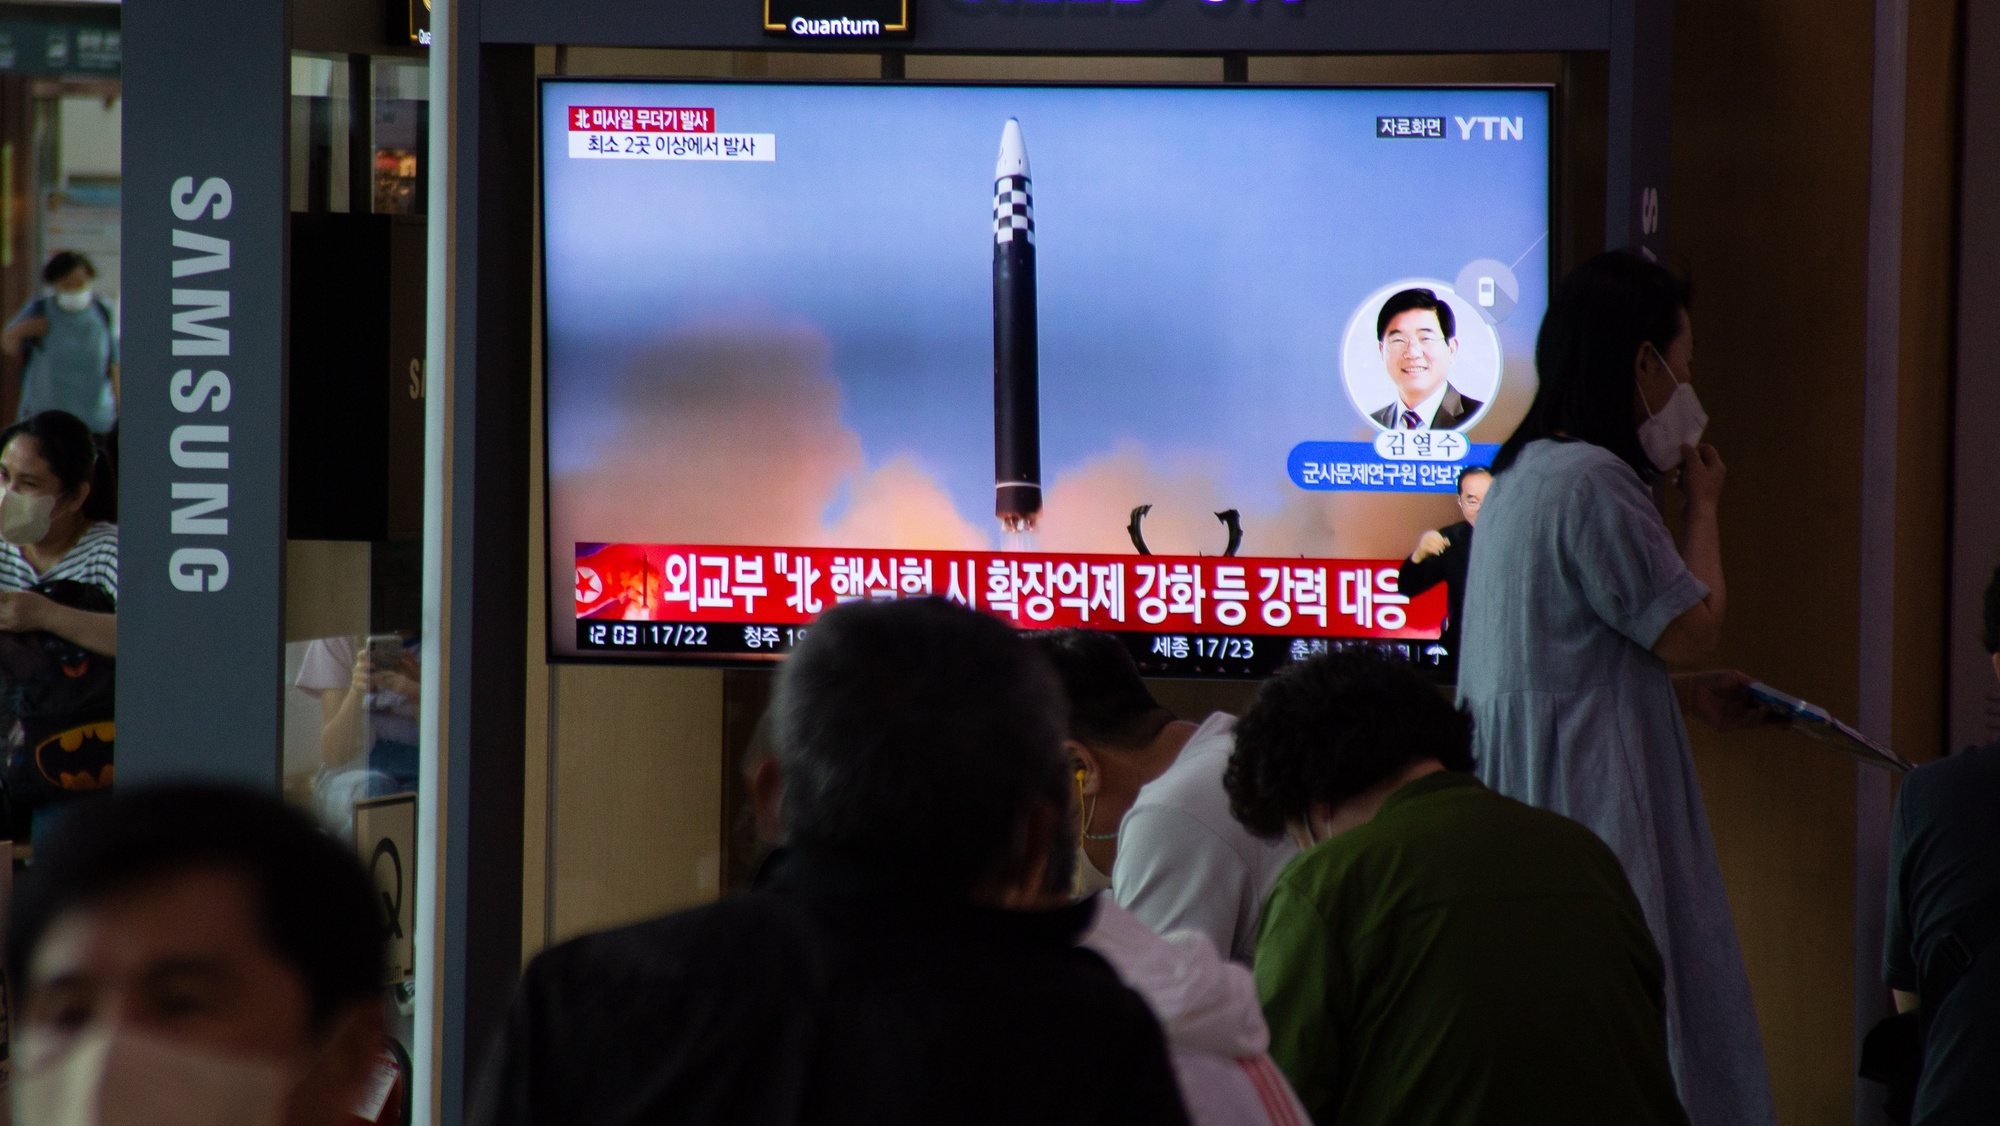 epa09996643 People watch a news segment pertaining to a North Korean missile launch, at a station in Seoul, South Korea, 05 June 2022. According to South Korea&#039;s Joint Chiefs of Staff (JCS), North Korea fired eight short-range ballistic missiles into the East Sea on 05 June.  EPA/JEON HEON-KYUN